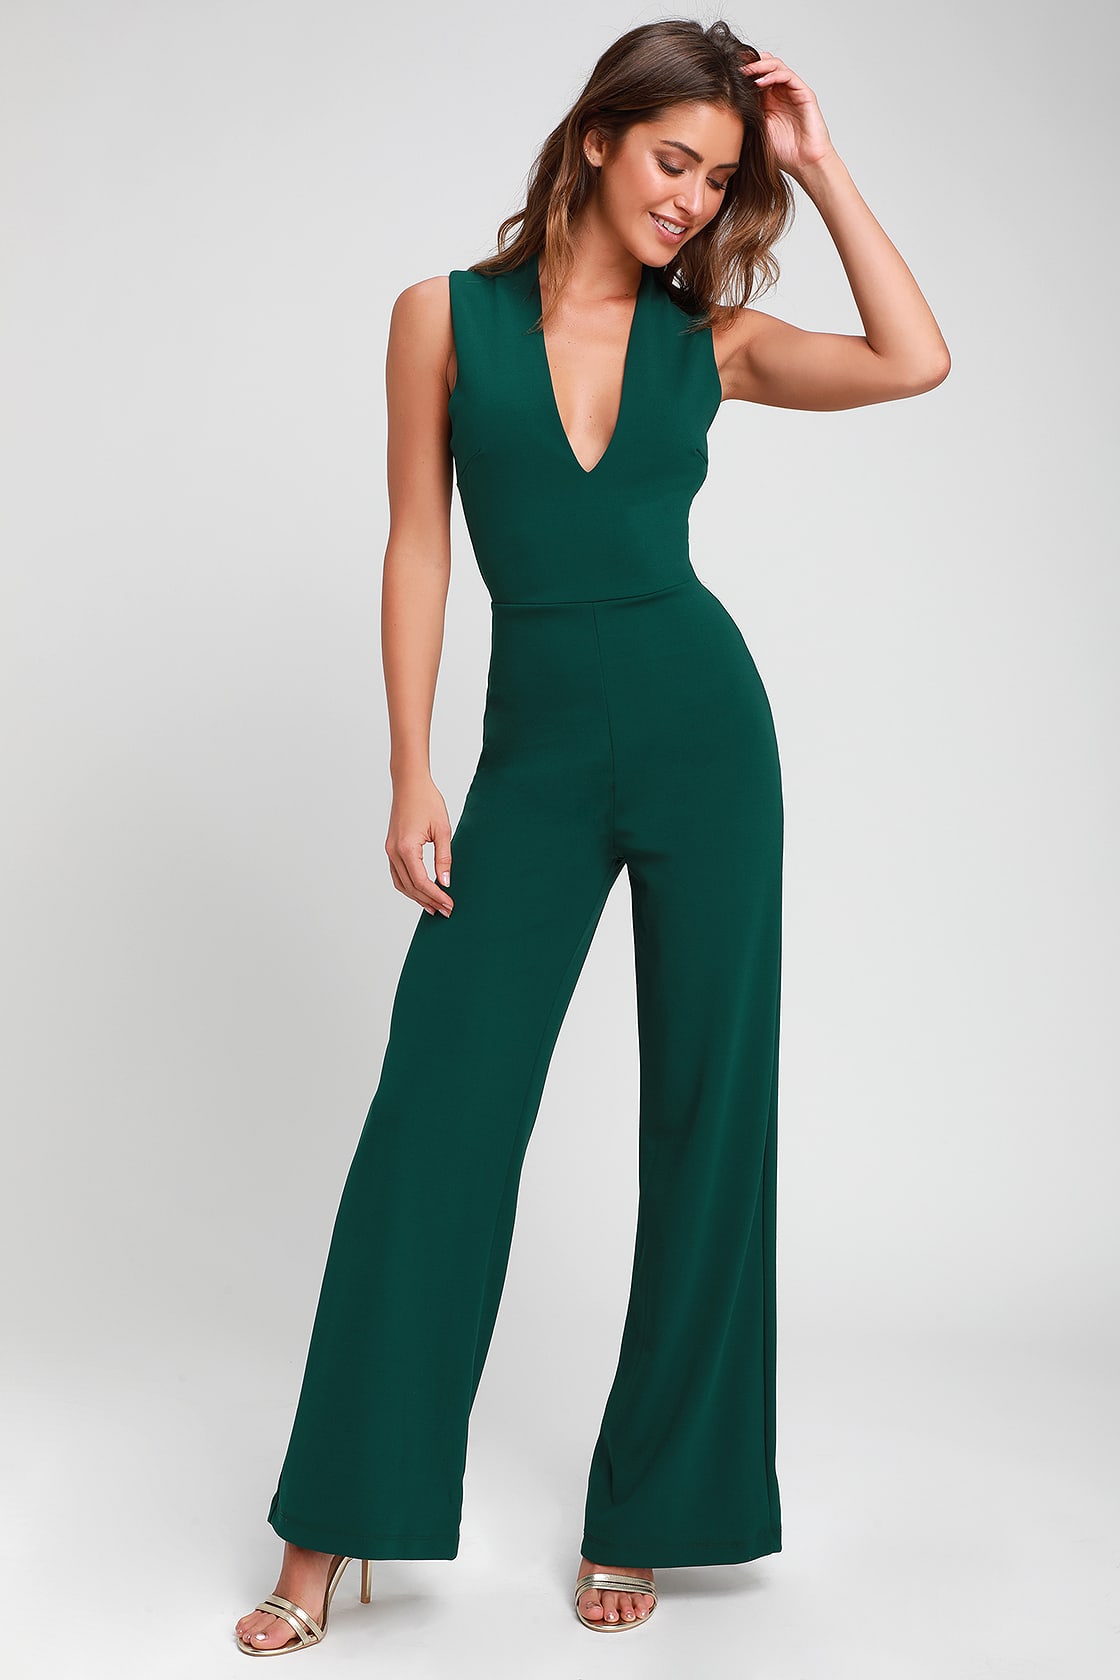 Thinking Out Loud Backless Jumpsuit